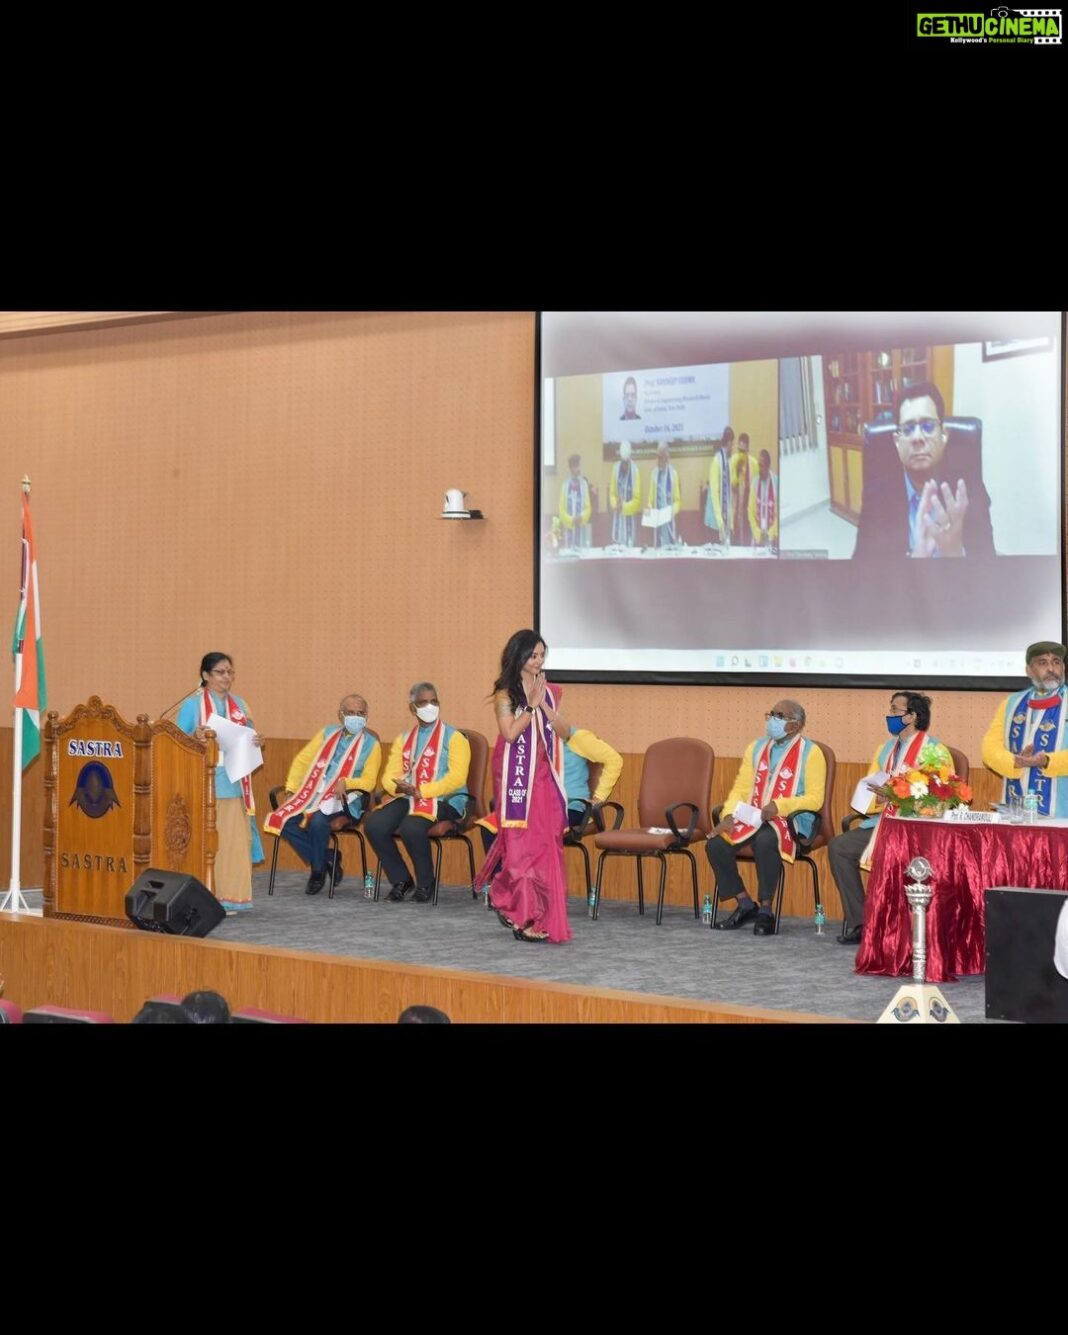 Vidya Pradeep Instagram - An emotional convocation ceremony and celebration: Holding a Doctorate degree in Stem cell biology (specialized in Ocular Stem cells) - An emotional journey of years of hard work, patience, perseverance and determination. I thank my Gurus, my Guide, Co-guide, Scientists, Clinicians and all who have guided and supported me throughout the journey in making my dream come true. I thank Sankara Nethralaya Eye hospital, Sastra University and all my dear friends and colleagues. Being an actor and a scientist simultaneously was extremely challenging, but at the end of the day, having a doctorate degree is worth all the pain, hard work, sacrifices and sleepless nights. While sharing these pics, i would like to inform my friends and well wishers that i have been offered a post-doc Scientist position in the US and will be moving next year. Seeking all your blessings and wishes as always. I'm forever grateful for all your love and support🙏 #vidyapradeep